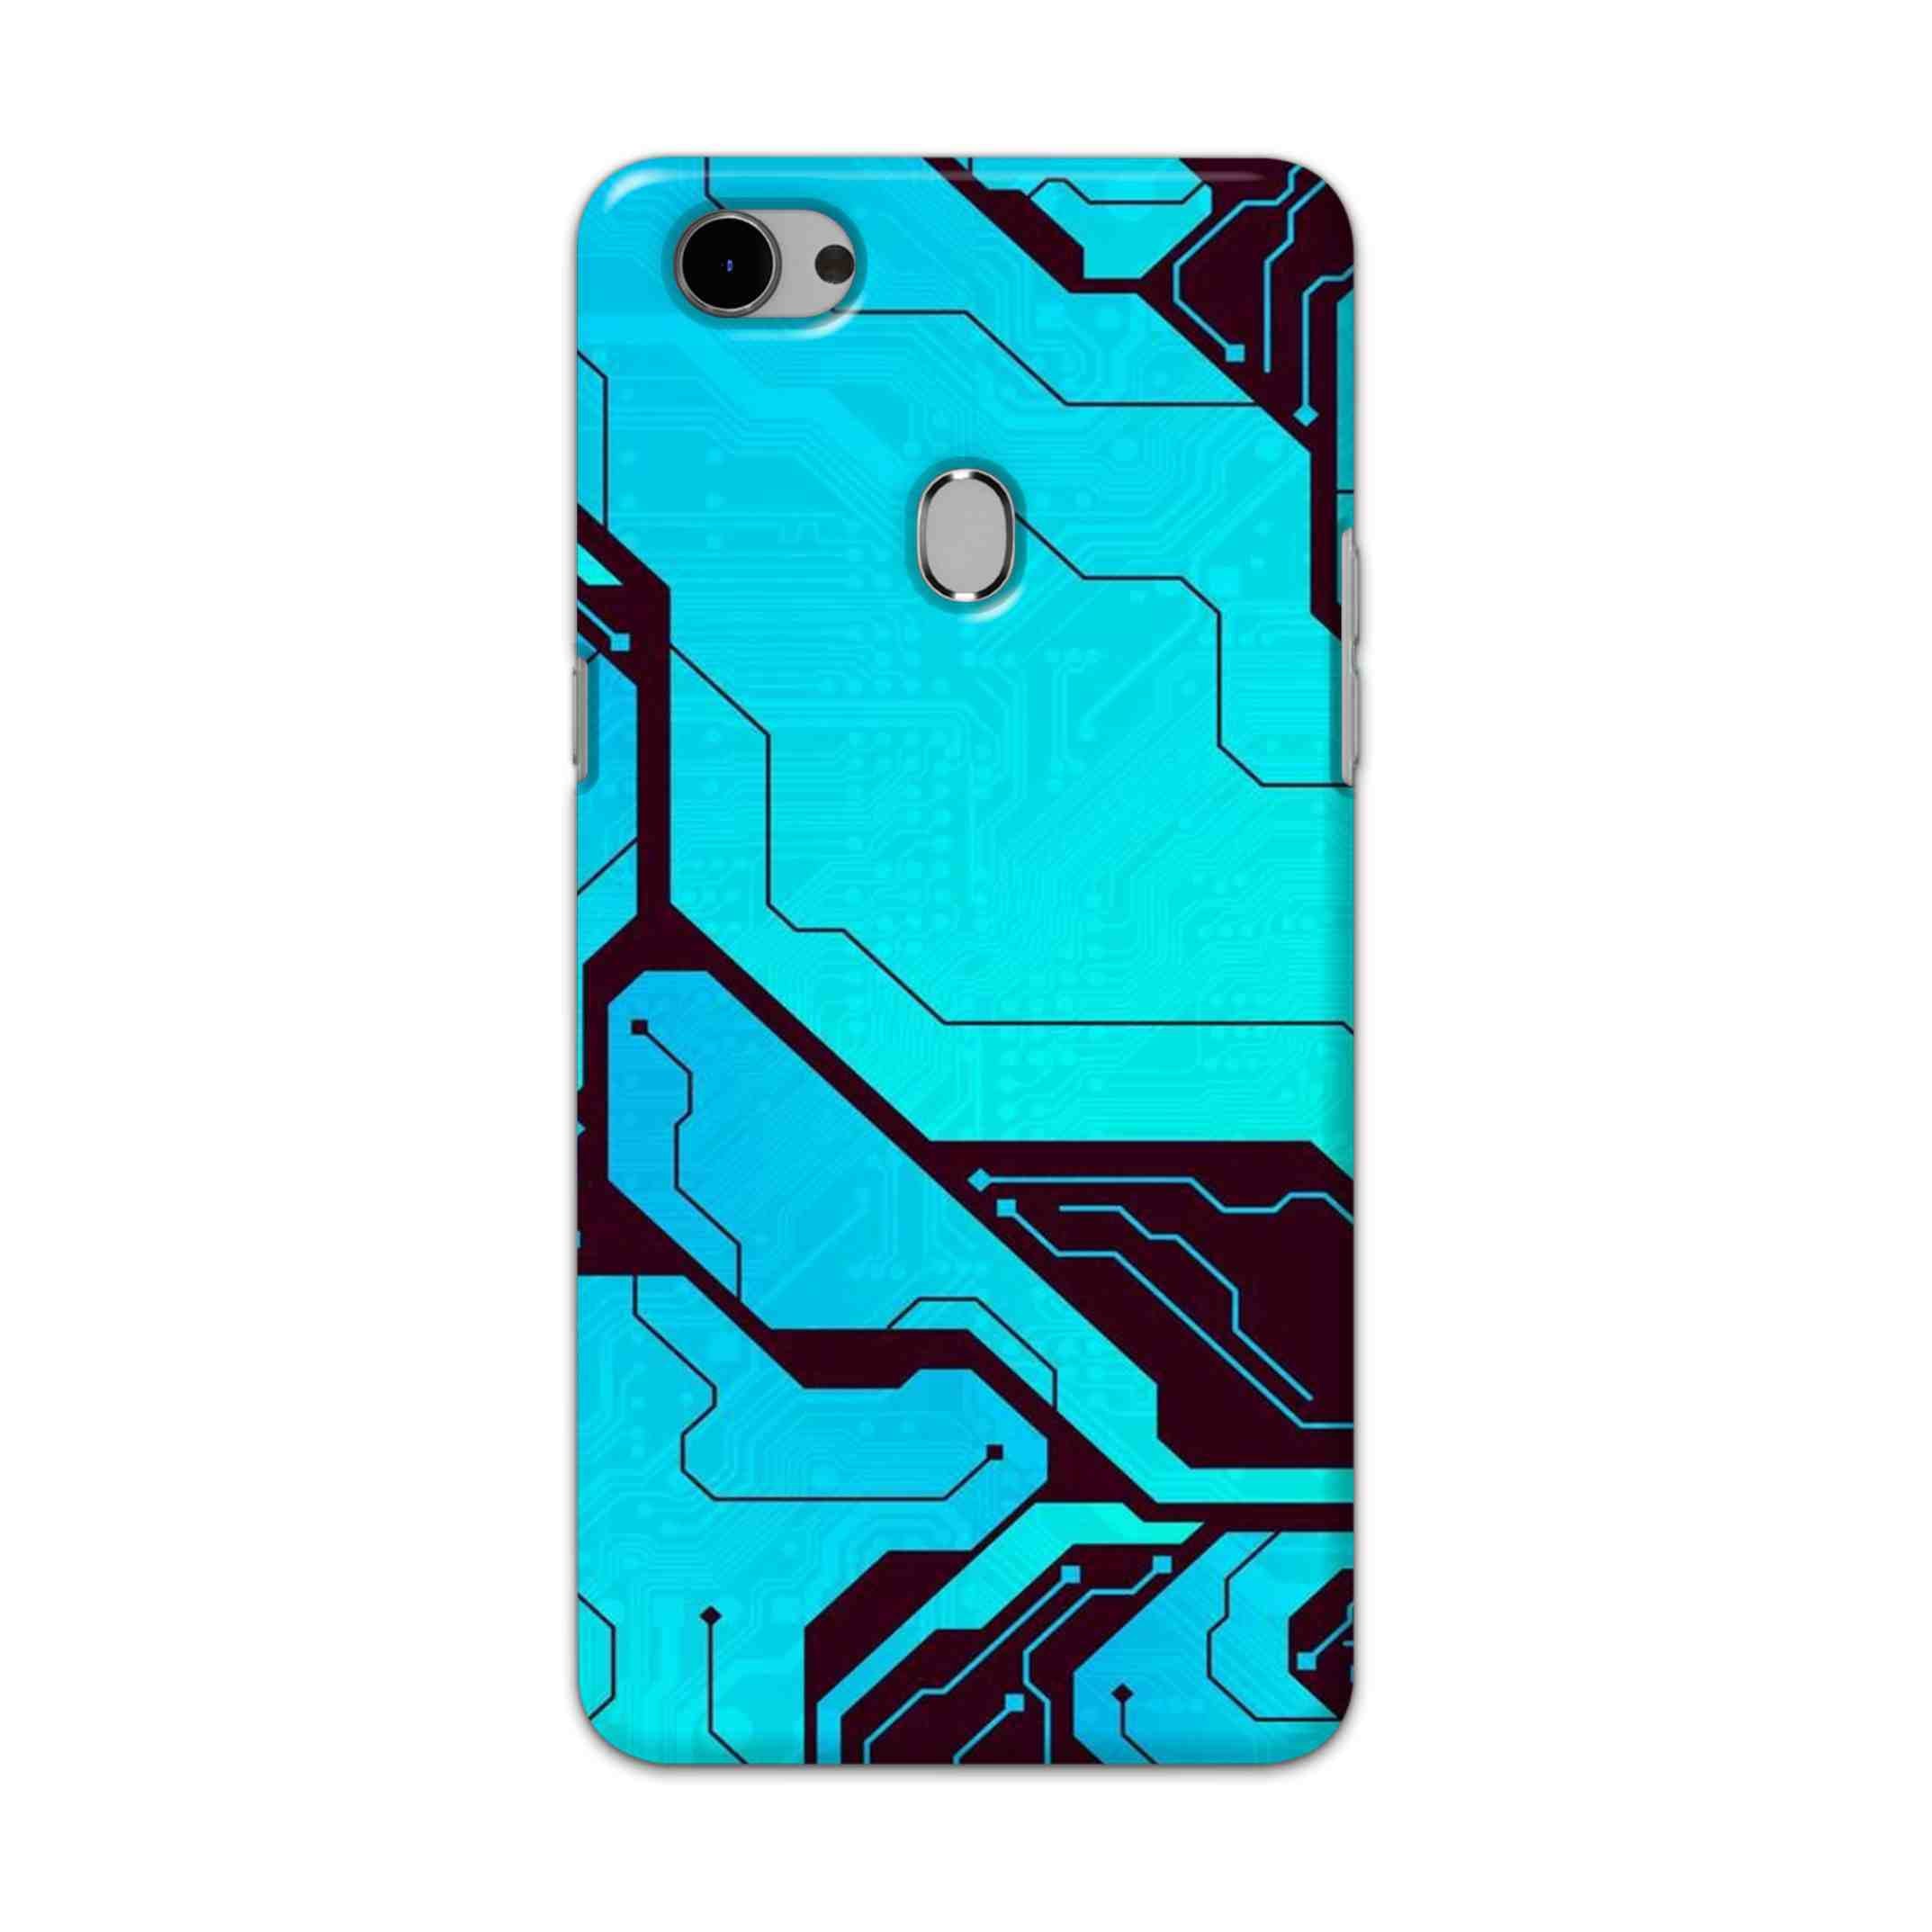 Buy Futuristic Line Hard Back Mobile Phone Case Cover For Oppo F7 Online